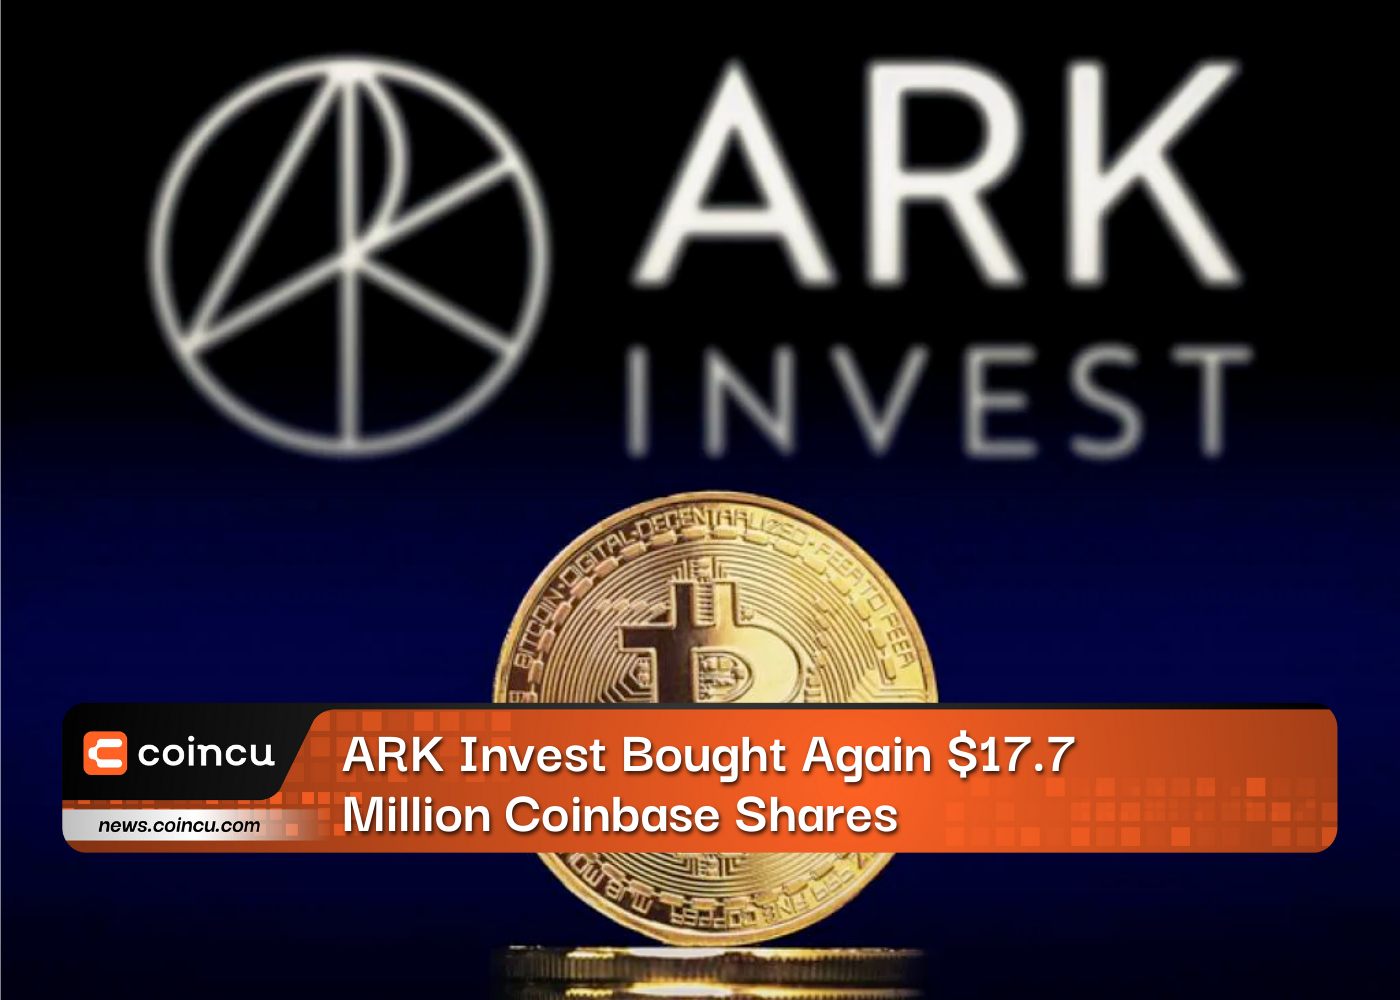 ARK Invest Bought Again $17.7 Million Coinbase Shares